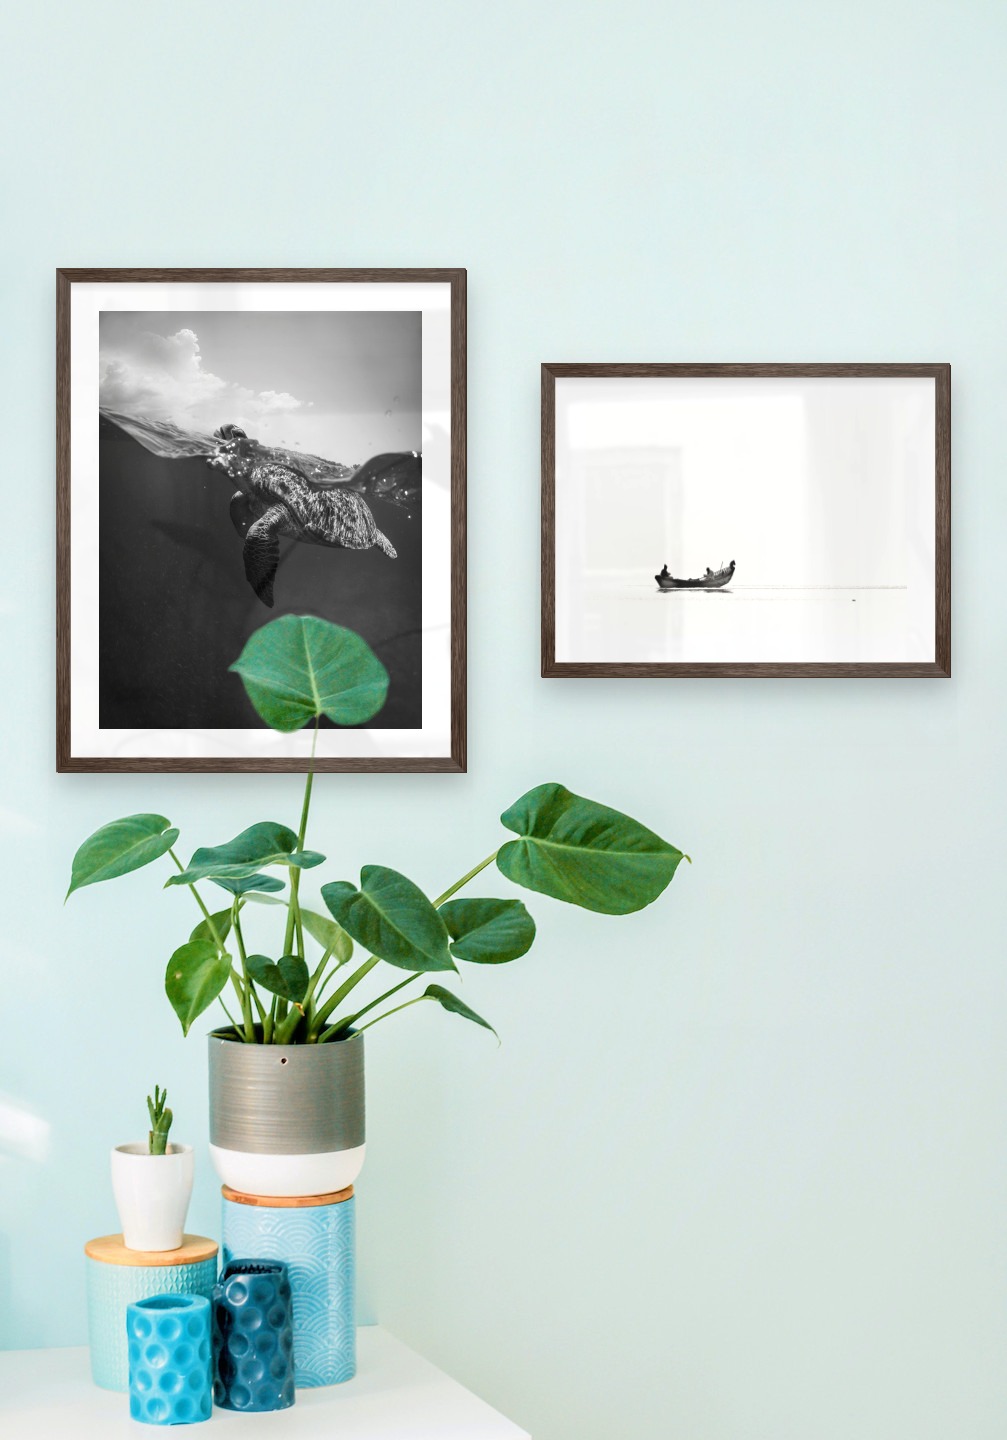 Gallery wall with picture frames in dark wood in sizes 40x50 and 30x40 with prints "Turtle" and "People in boat"